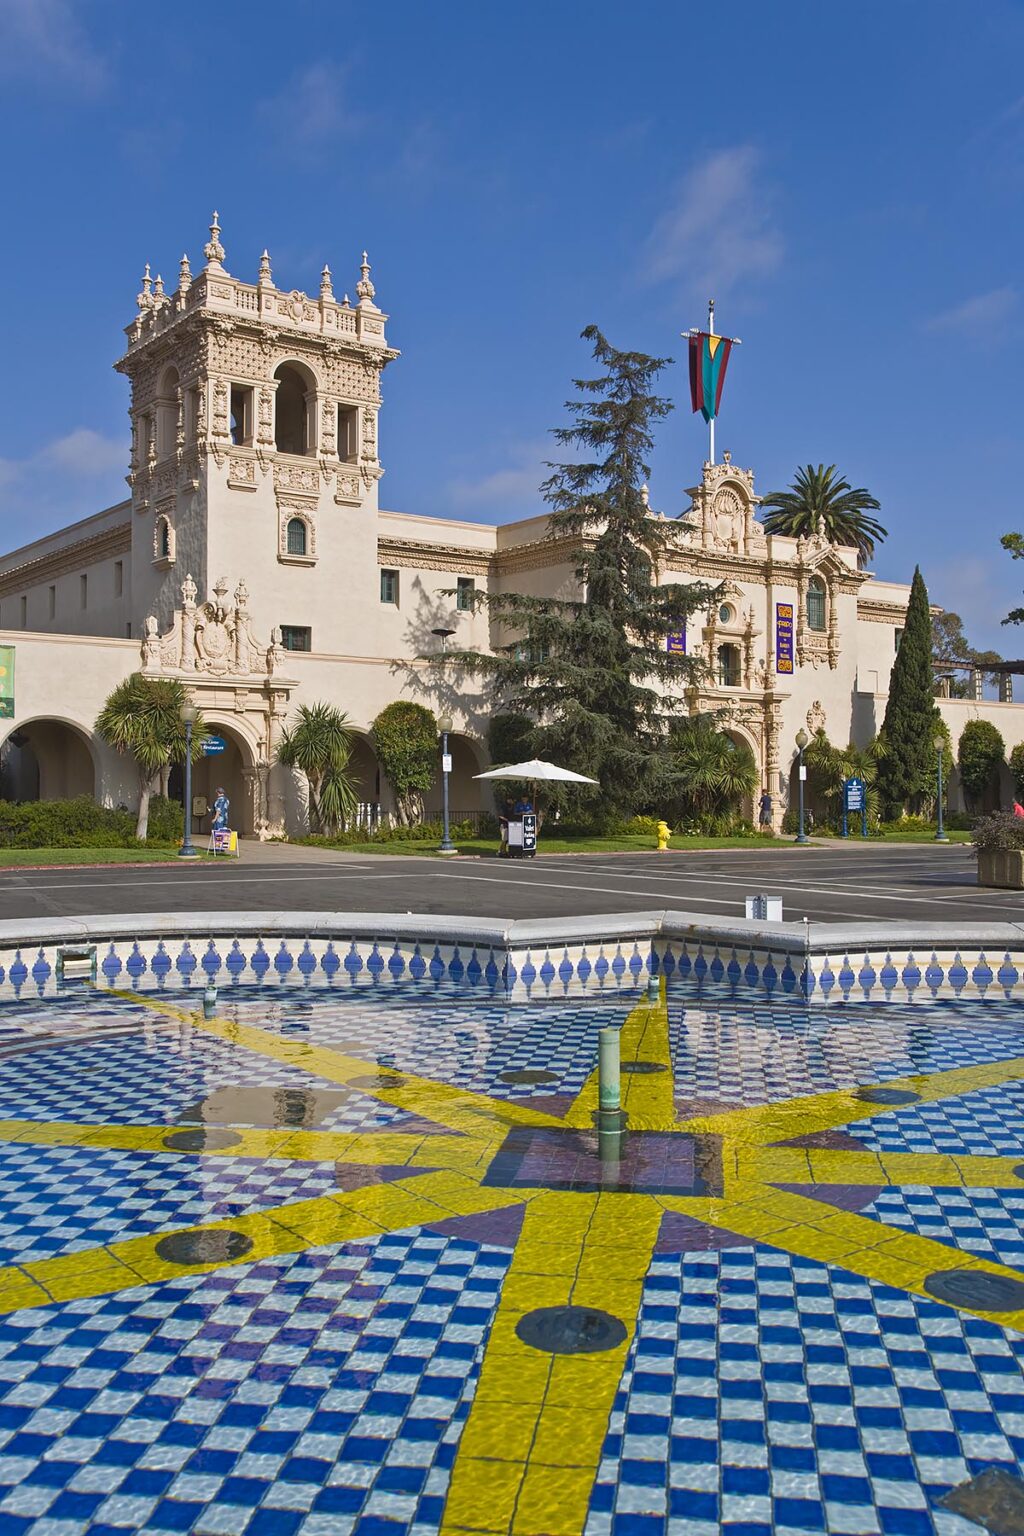 A WATER FOUNTAIN and the HOUSE OF HOSPITALITY located in BALBOA PARK - SAN DIEGO, CALIFORNIA